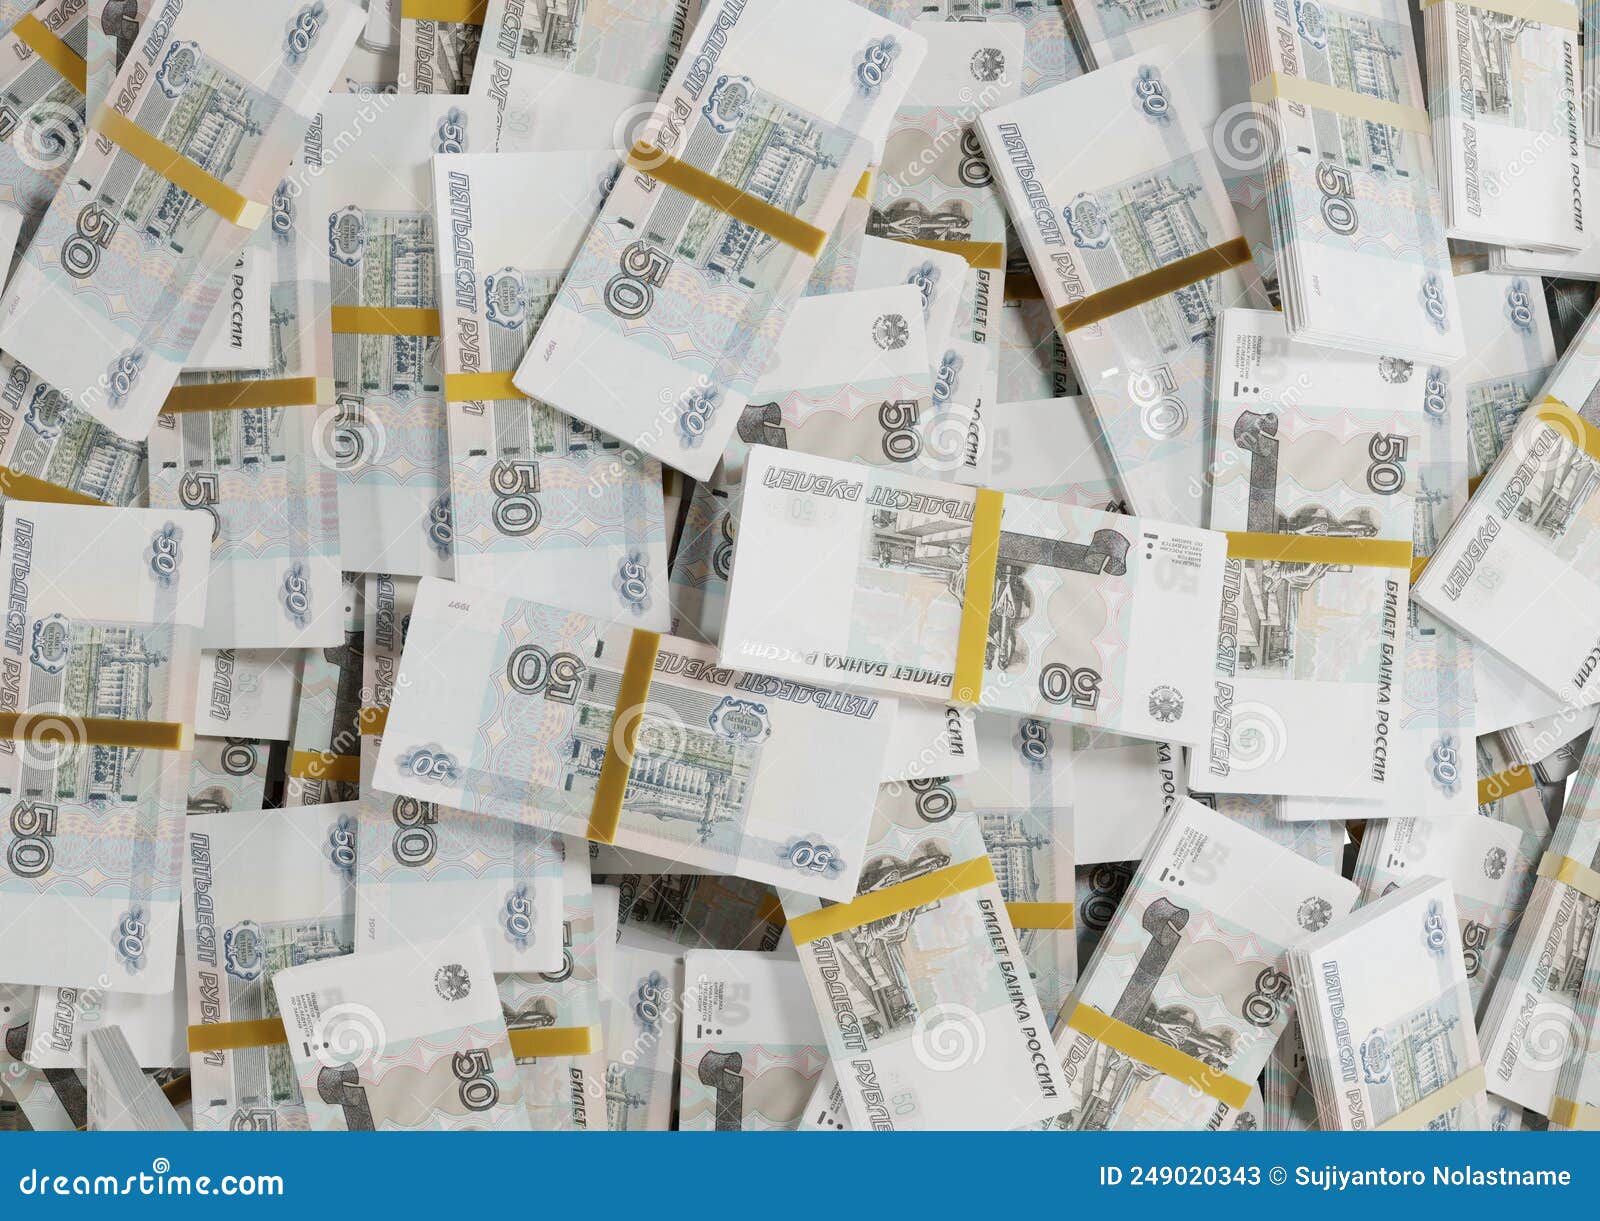 stack russian cash or banknotes of rusia rubles scattered on a white background  the concept of economic, finance, backgro